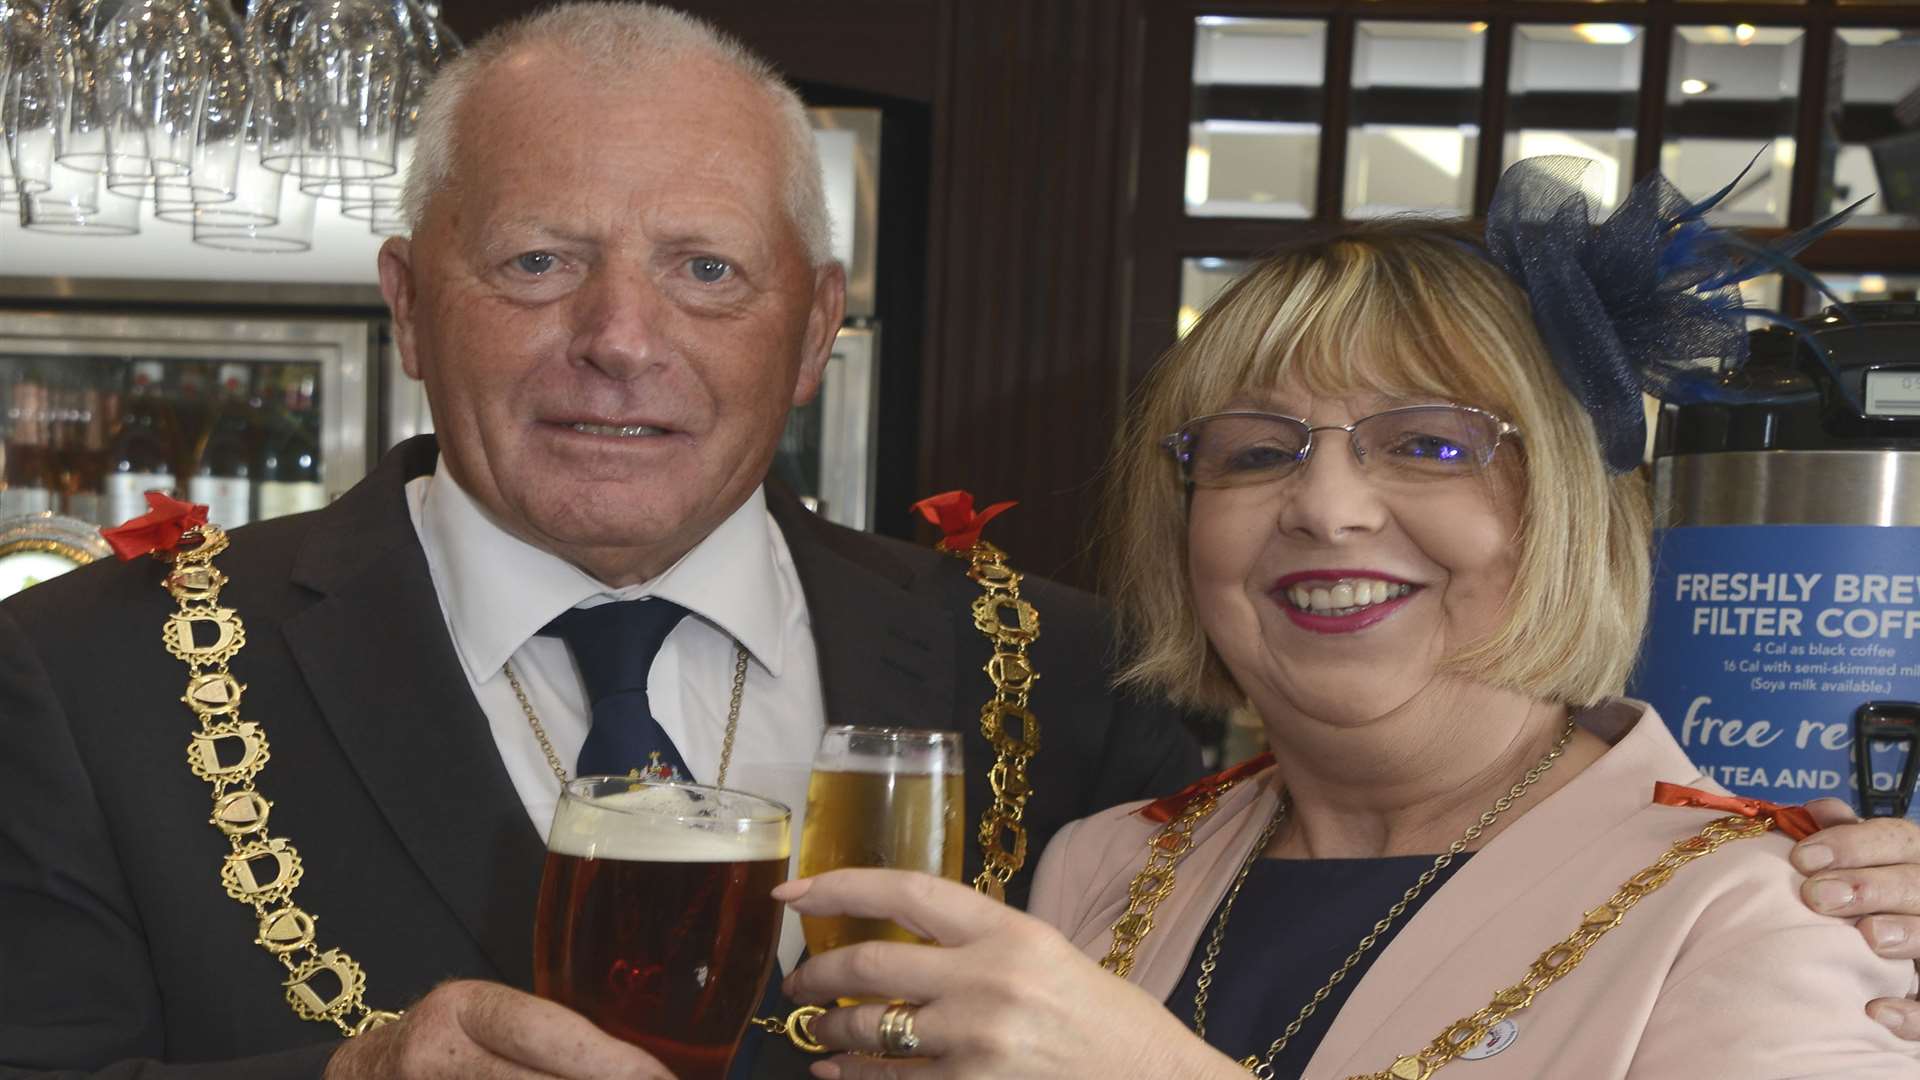 Mayor Cllr Trevor Shonk and Mayoress Mandy Shonk enjoy a drink in the new bar Picture: Paul Amos